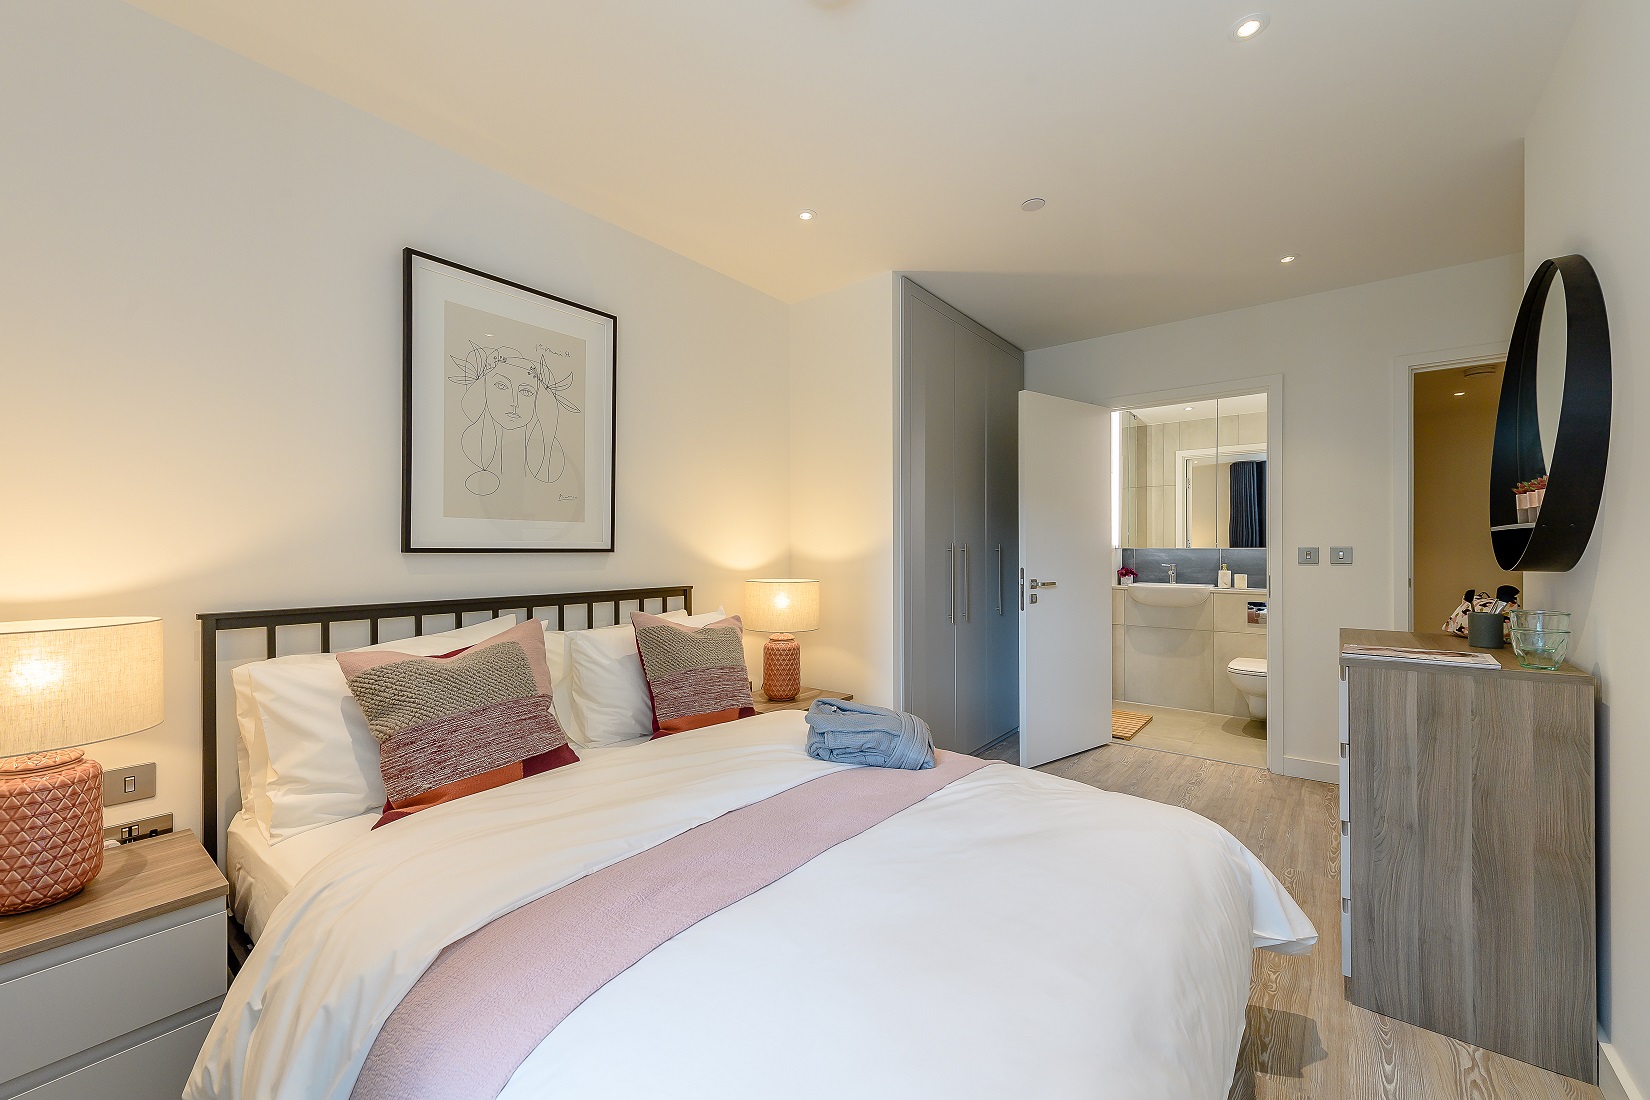 Serviced Apartments Wembley | North London Accommodation Near Wembley Stadium and SSE Arena | Corporate Housing London | Free Wifi & Balcony and 40mbps Wi-Fi, Smart TV, washer/dryer, and balcony Book Now! +44 (0) 208 691 3920